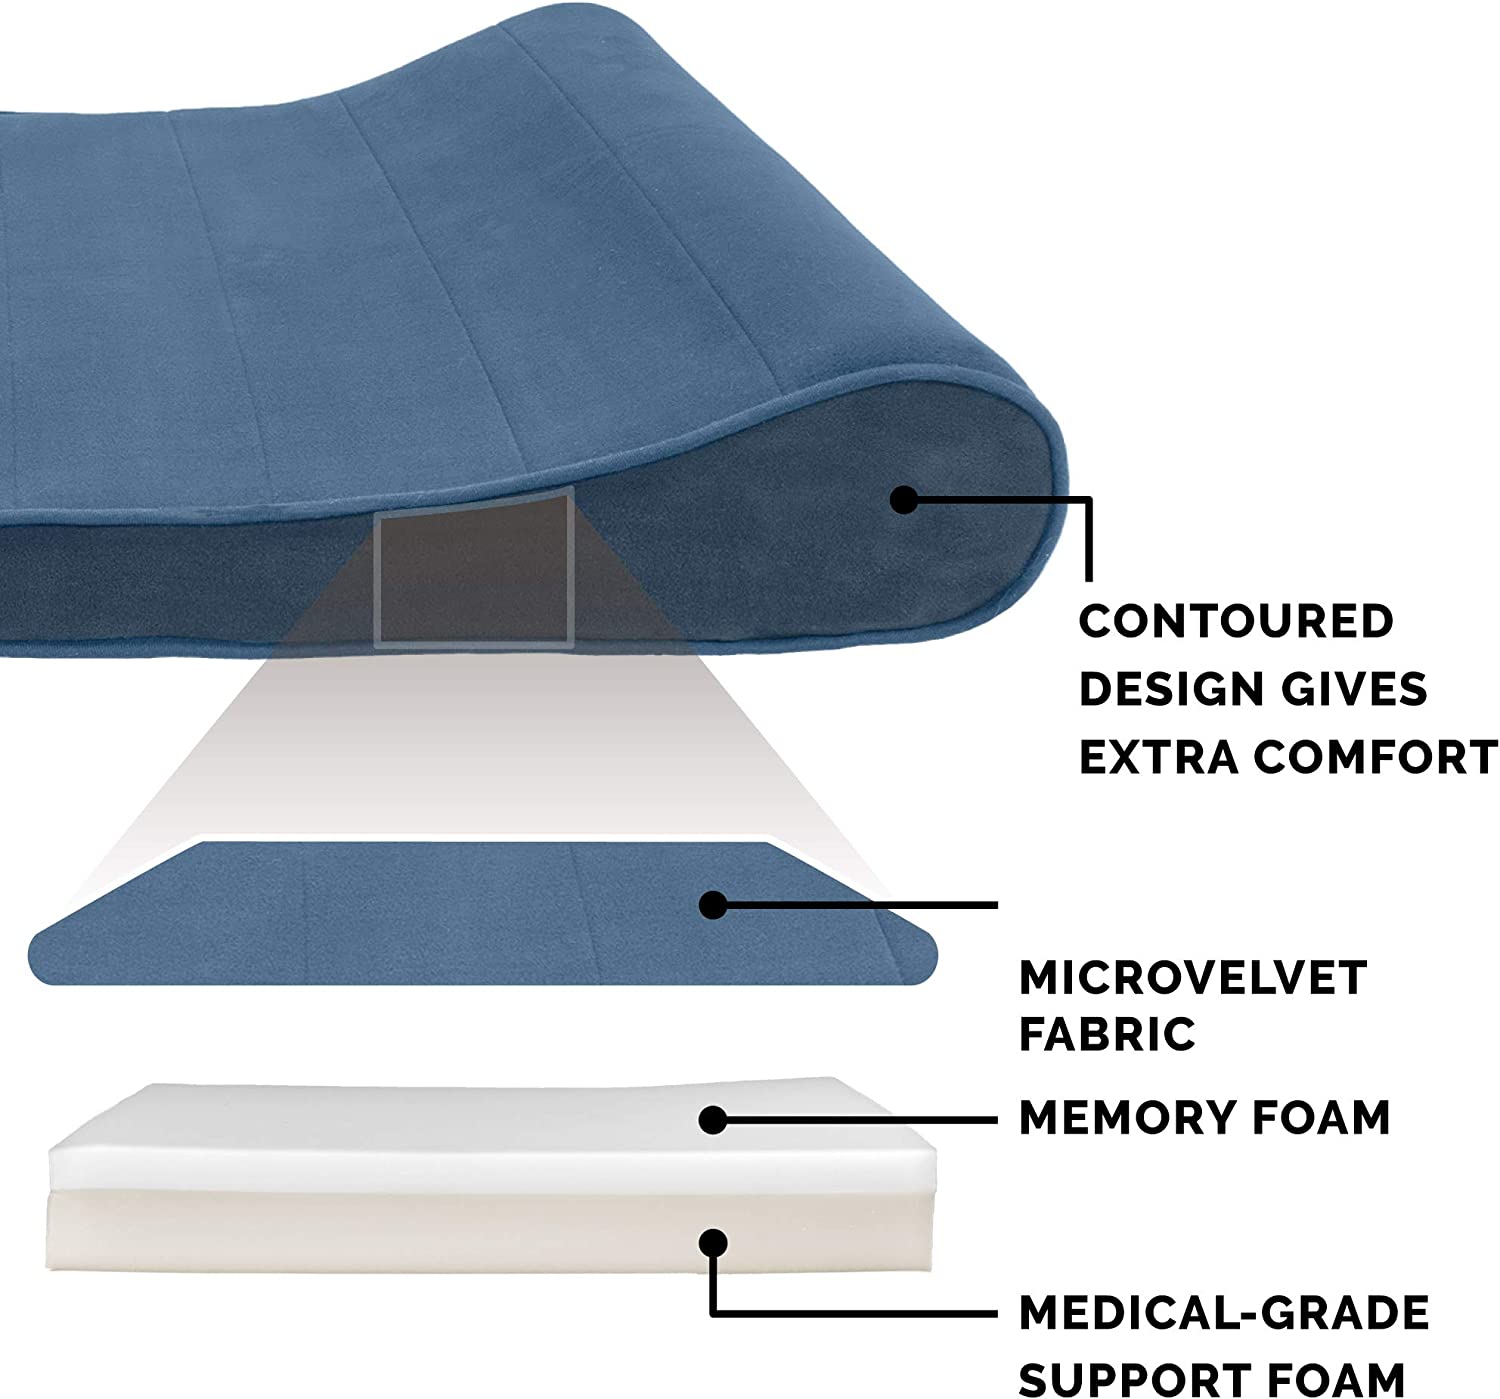 Furhaven XXL Memory Foam Dog Bed Microvelvet Luxe Lounger w/ Removable Washable Cover - Stellar Blue Jumbo Plus (XX-Large) parallel imported goods 